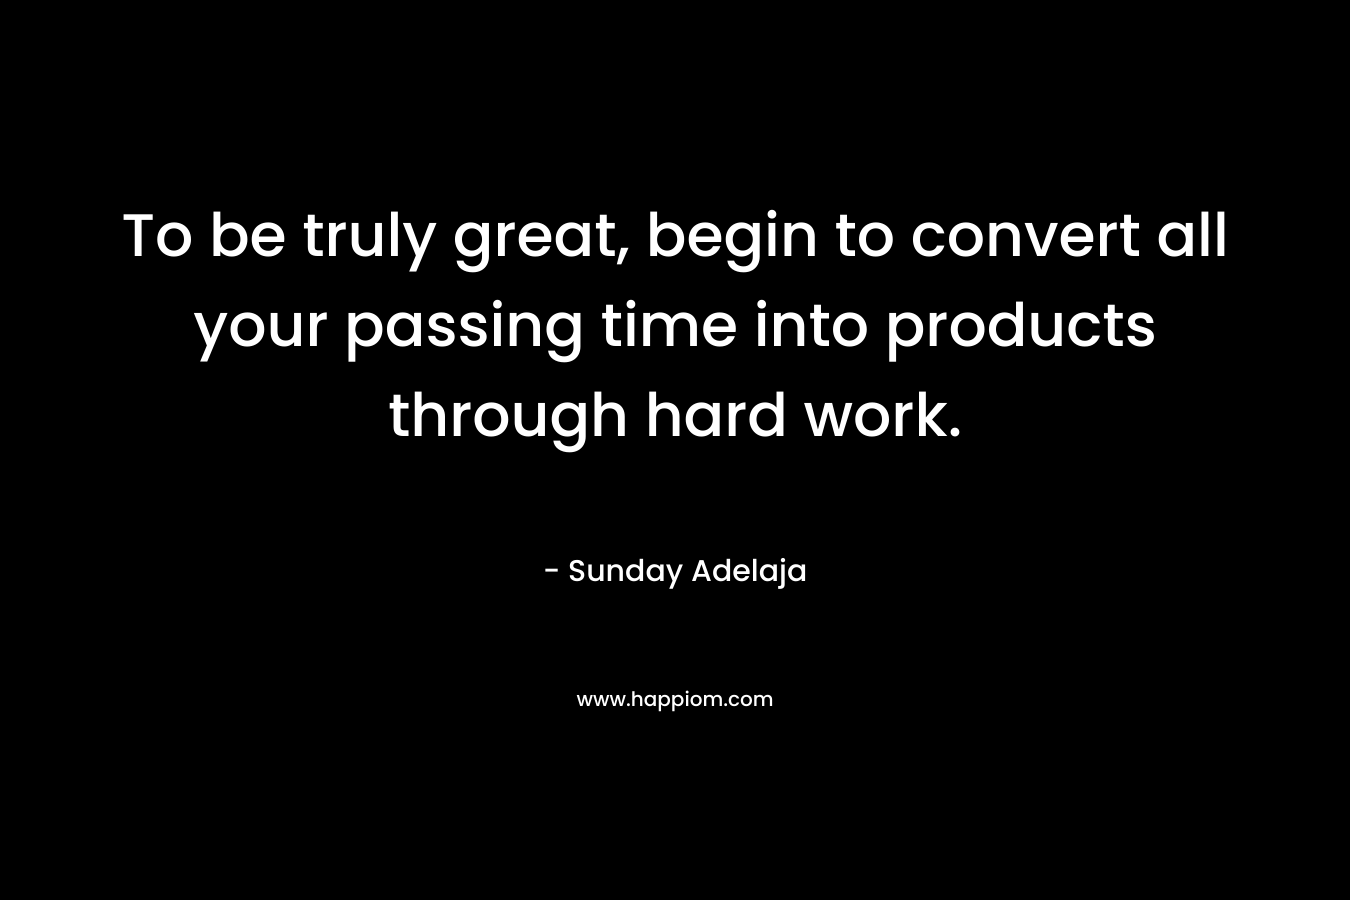 To be truly great, begin to convert all your passing time into products through hard work.